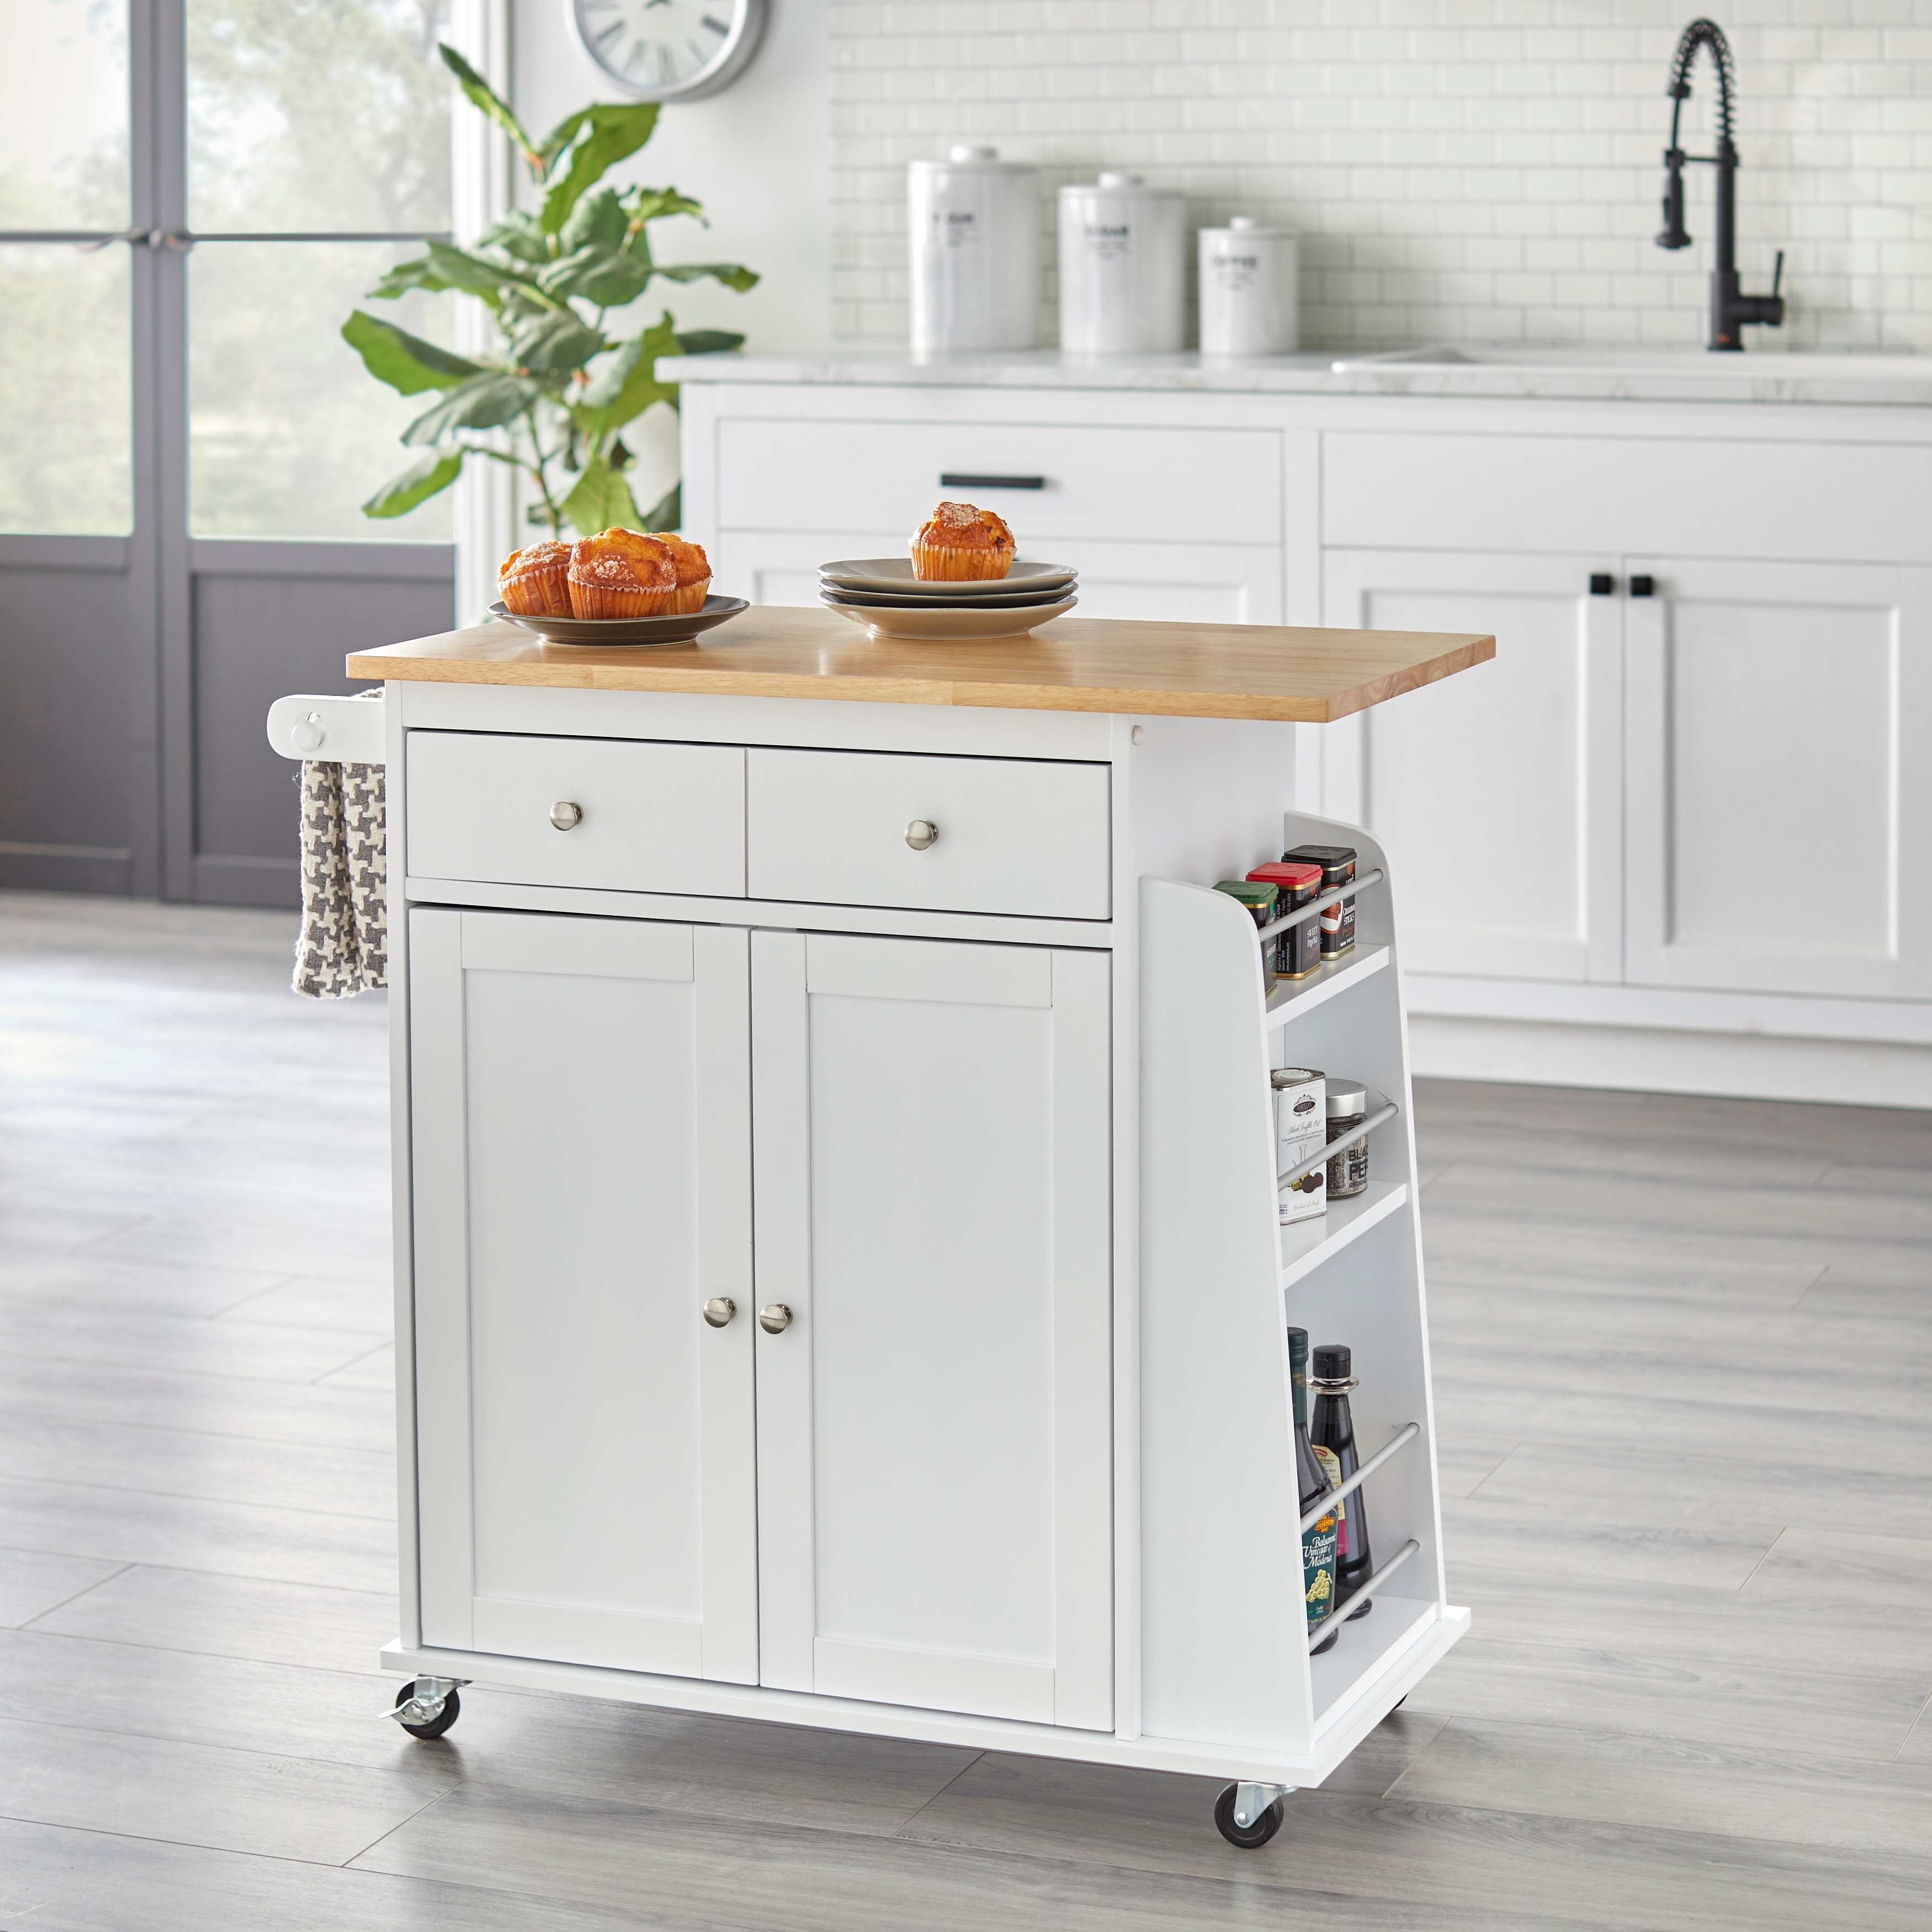 https://ak1.ostkcdn.com/images/products/is/images/direct/49fed2f51ec4d369732ecf5a9da1a13c9c2ec9f5/Simple-Living-White-Sonoma-Kitchen-Cart.jpg